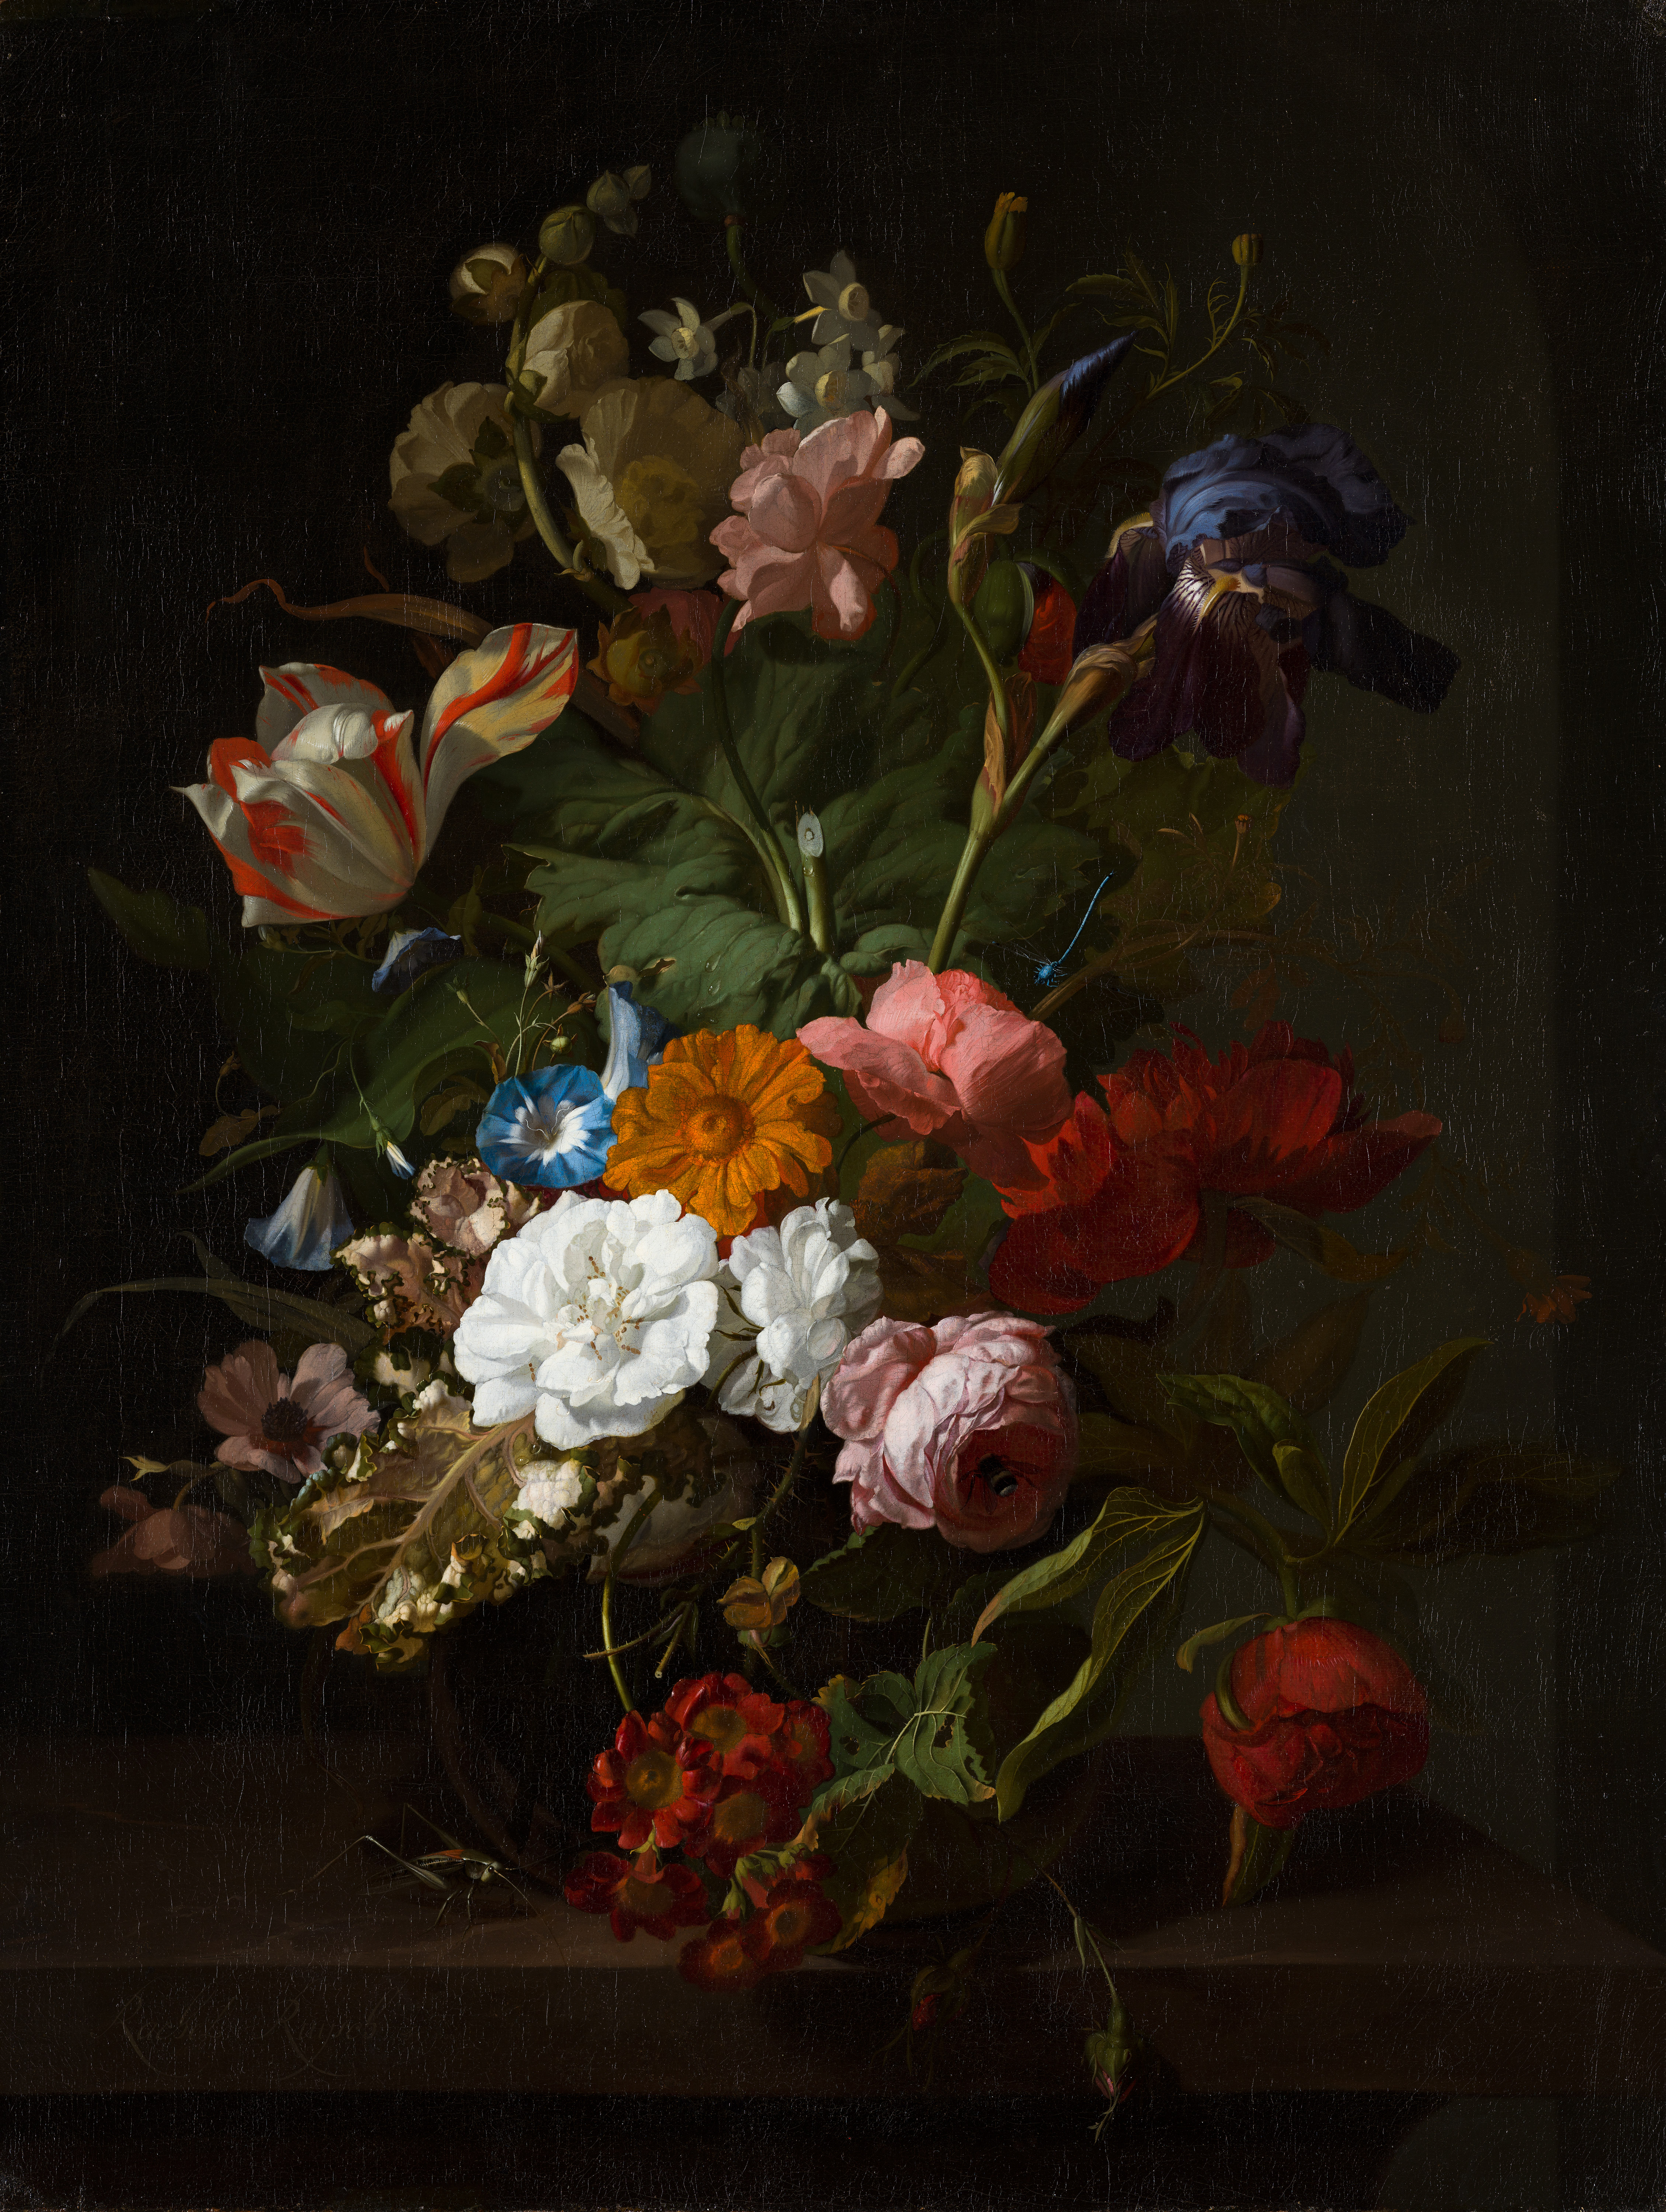 A vibrant, unstructured floral still life set against a dark background. The arrangement is resting on a ledge and the flowers include tulips and roses, as well as others. There is an insect, perhaps a grasshopper, sitting on the table alongside the arrangement.